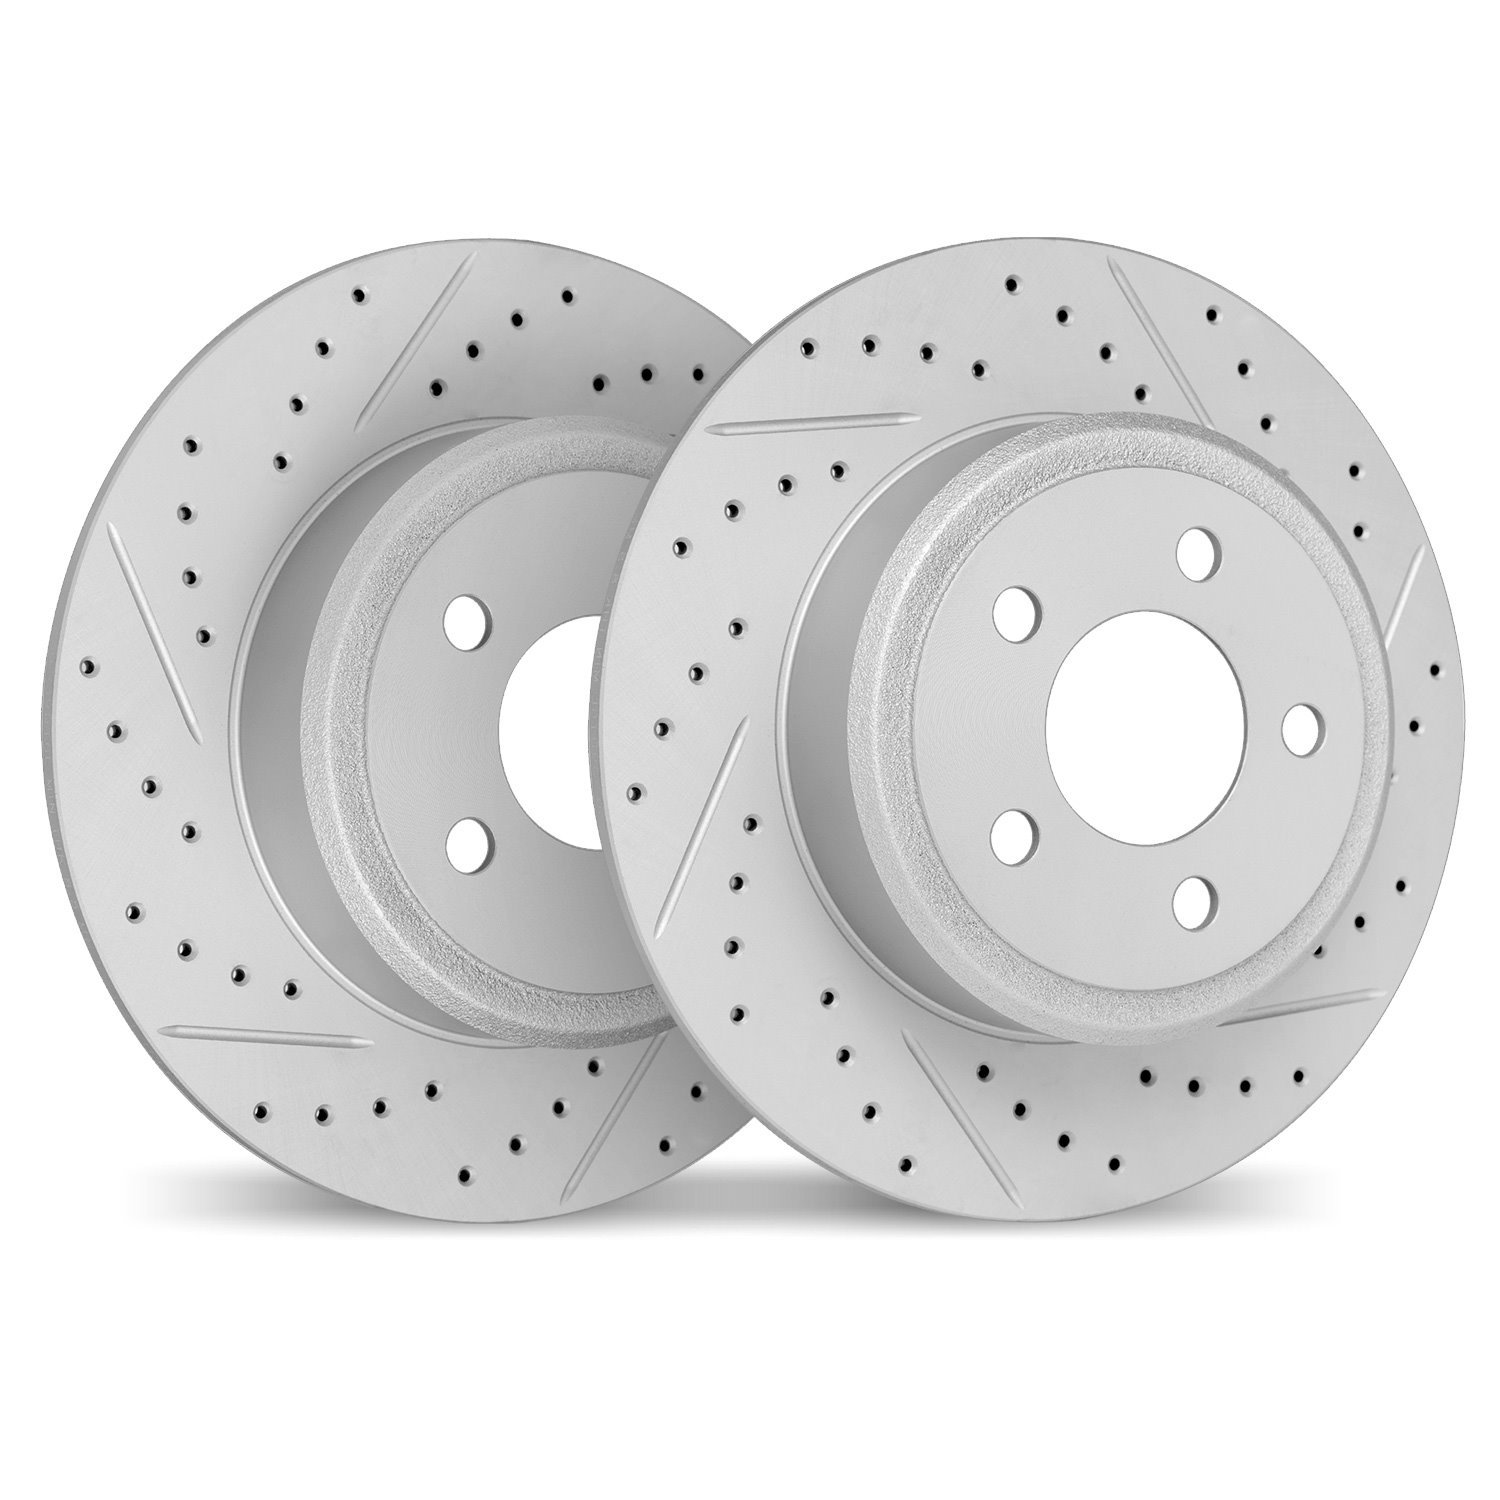 2002-55007 Geoperformance Drilled/Slotted Brake Rotors, 2003-2011 Ford/Lincoln/Mercury/Mazda, Position: Rear